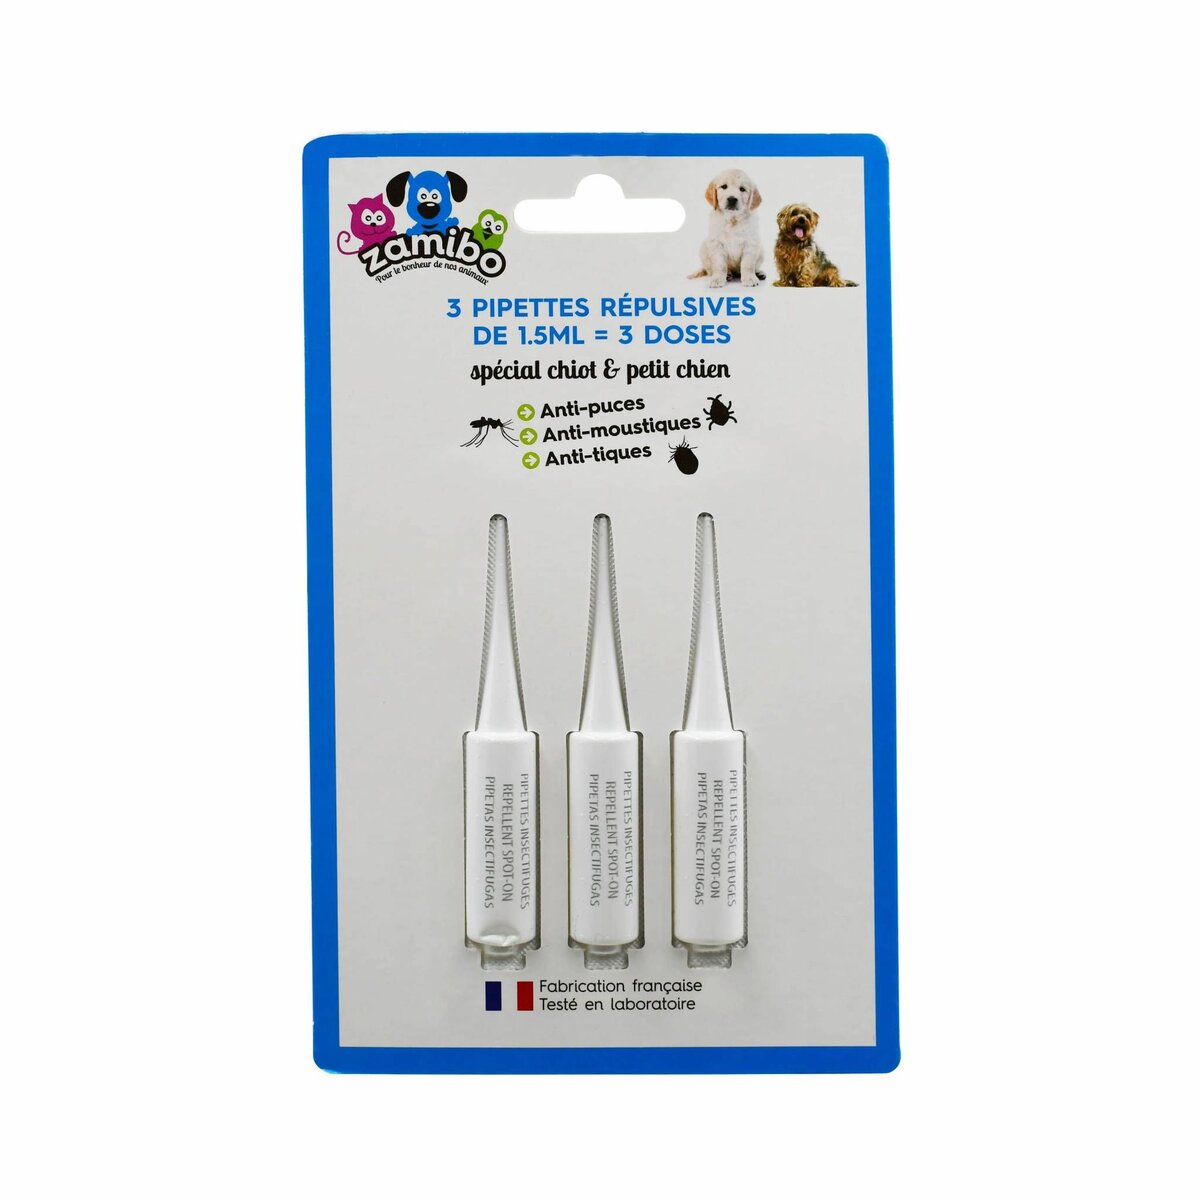  3 pipettes répulsives antiparasitaire pour chien, made in France